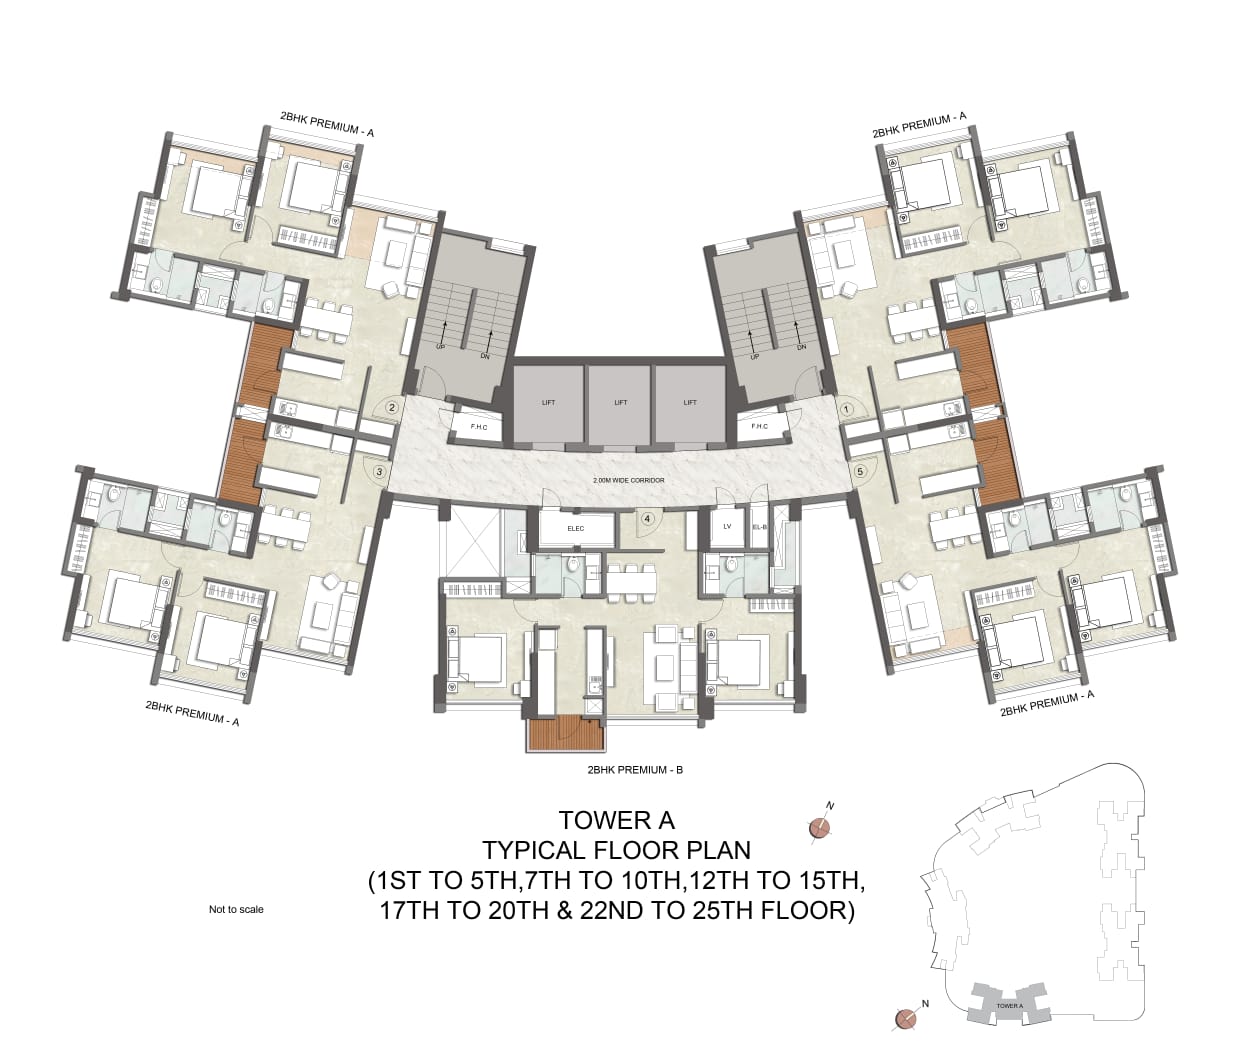 Typical Floor Plan – Tower A